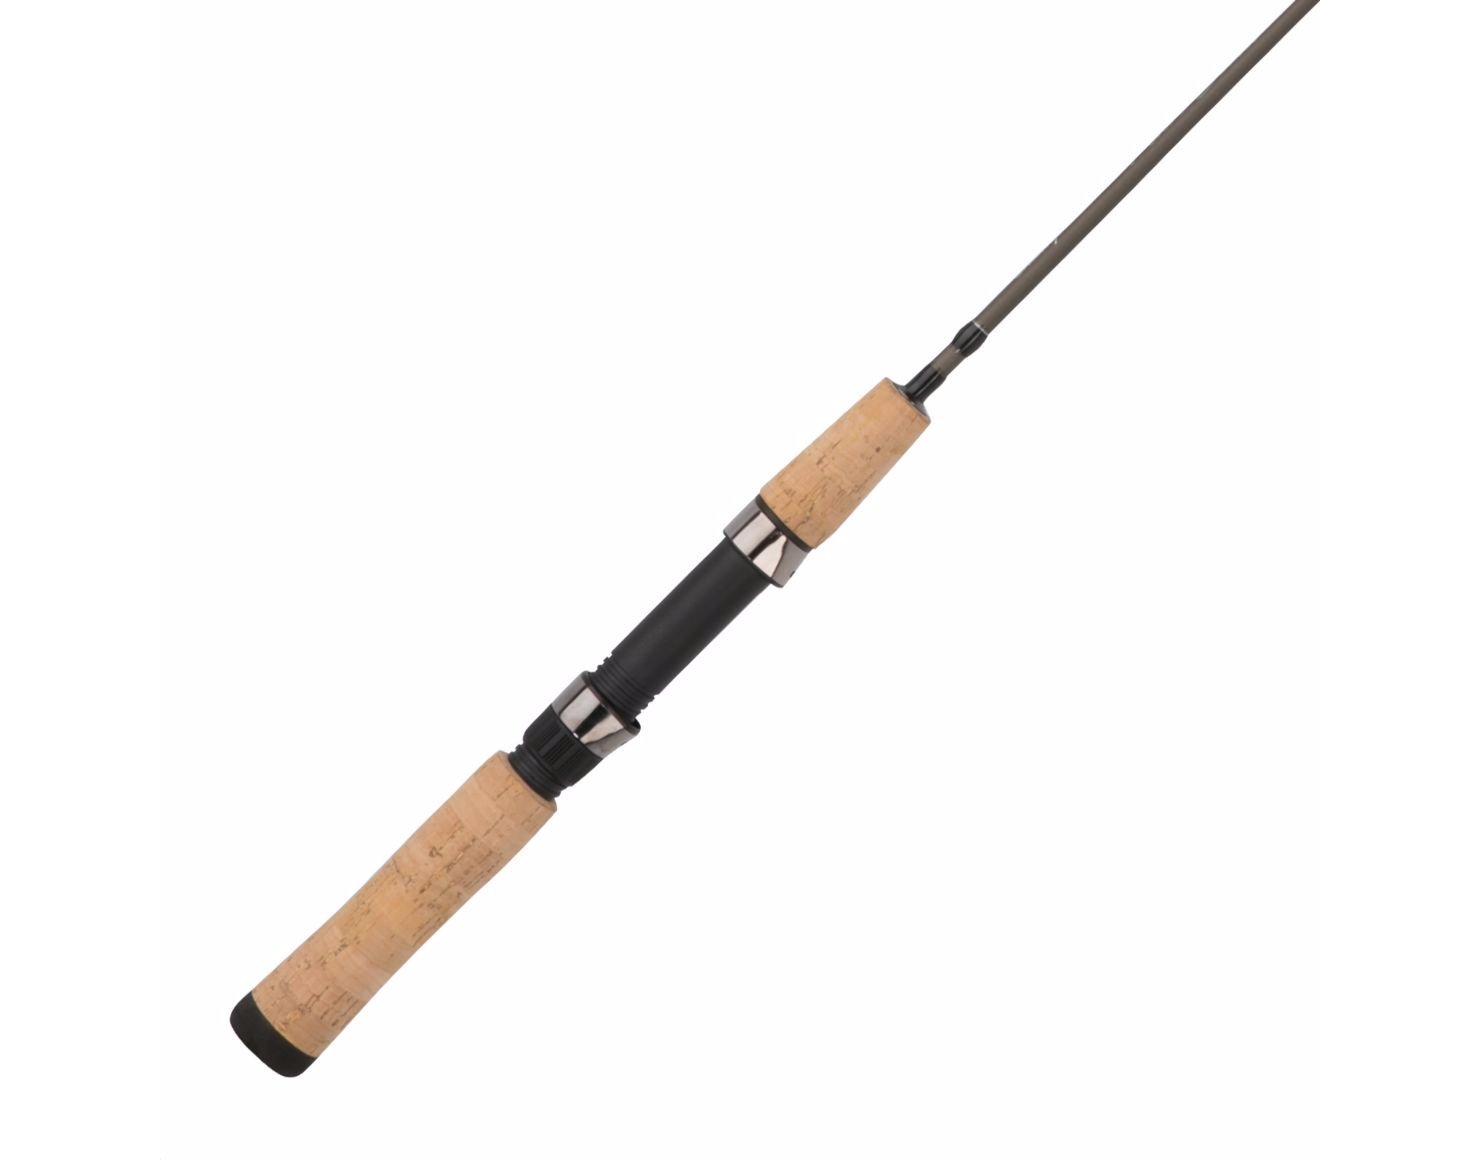 Shakespeare Micro Series Spinning Fishing Rod - image 2 of 7